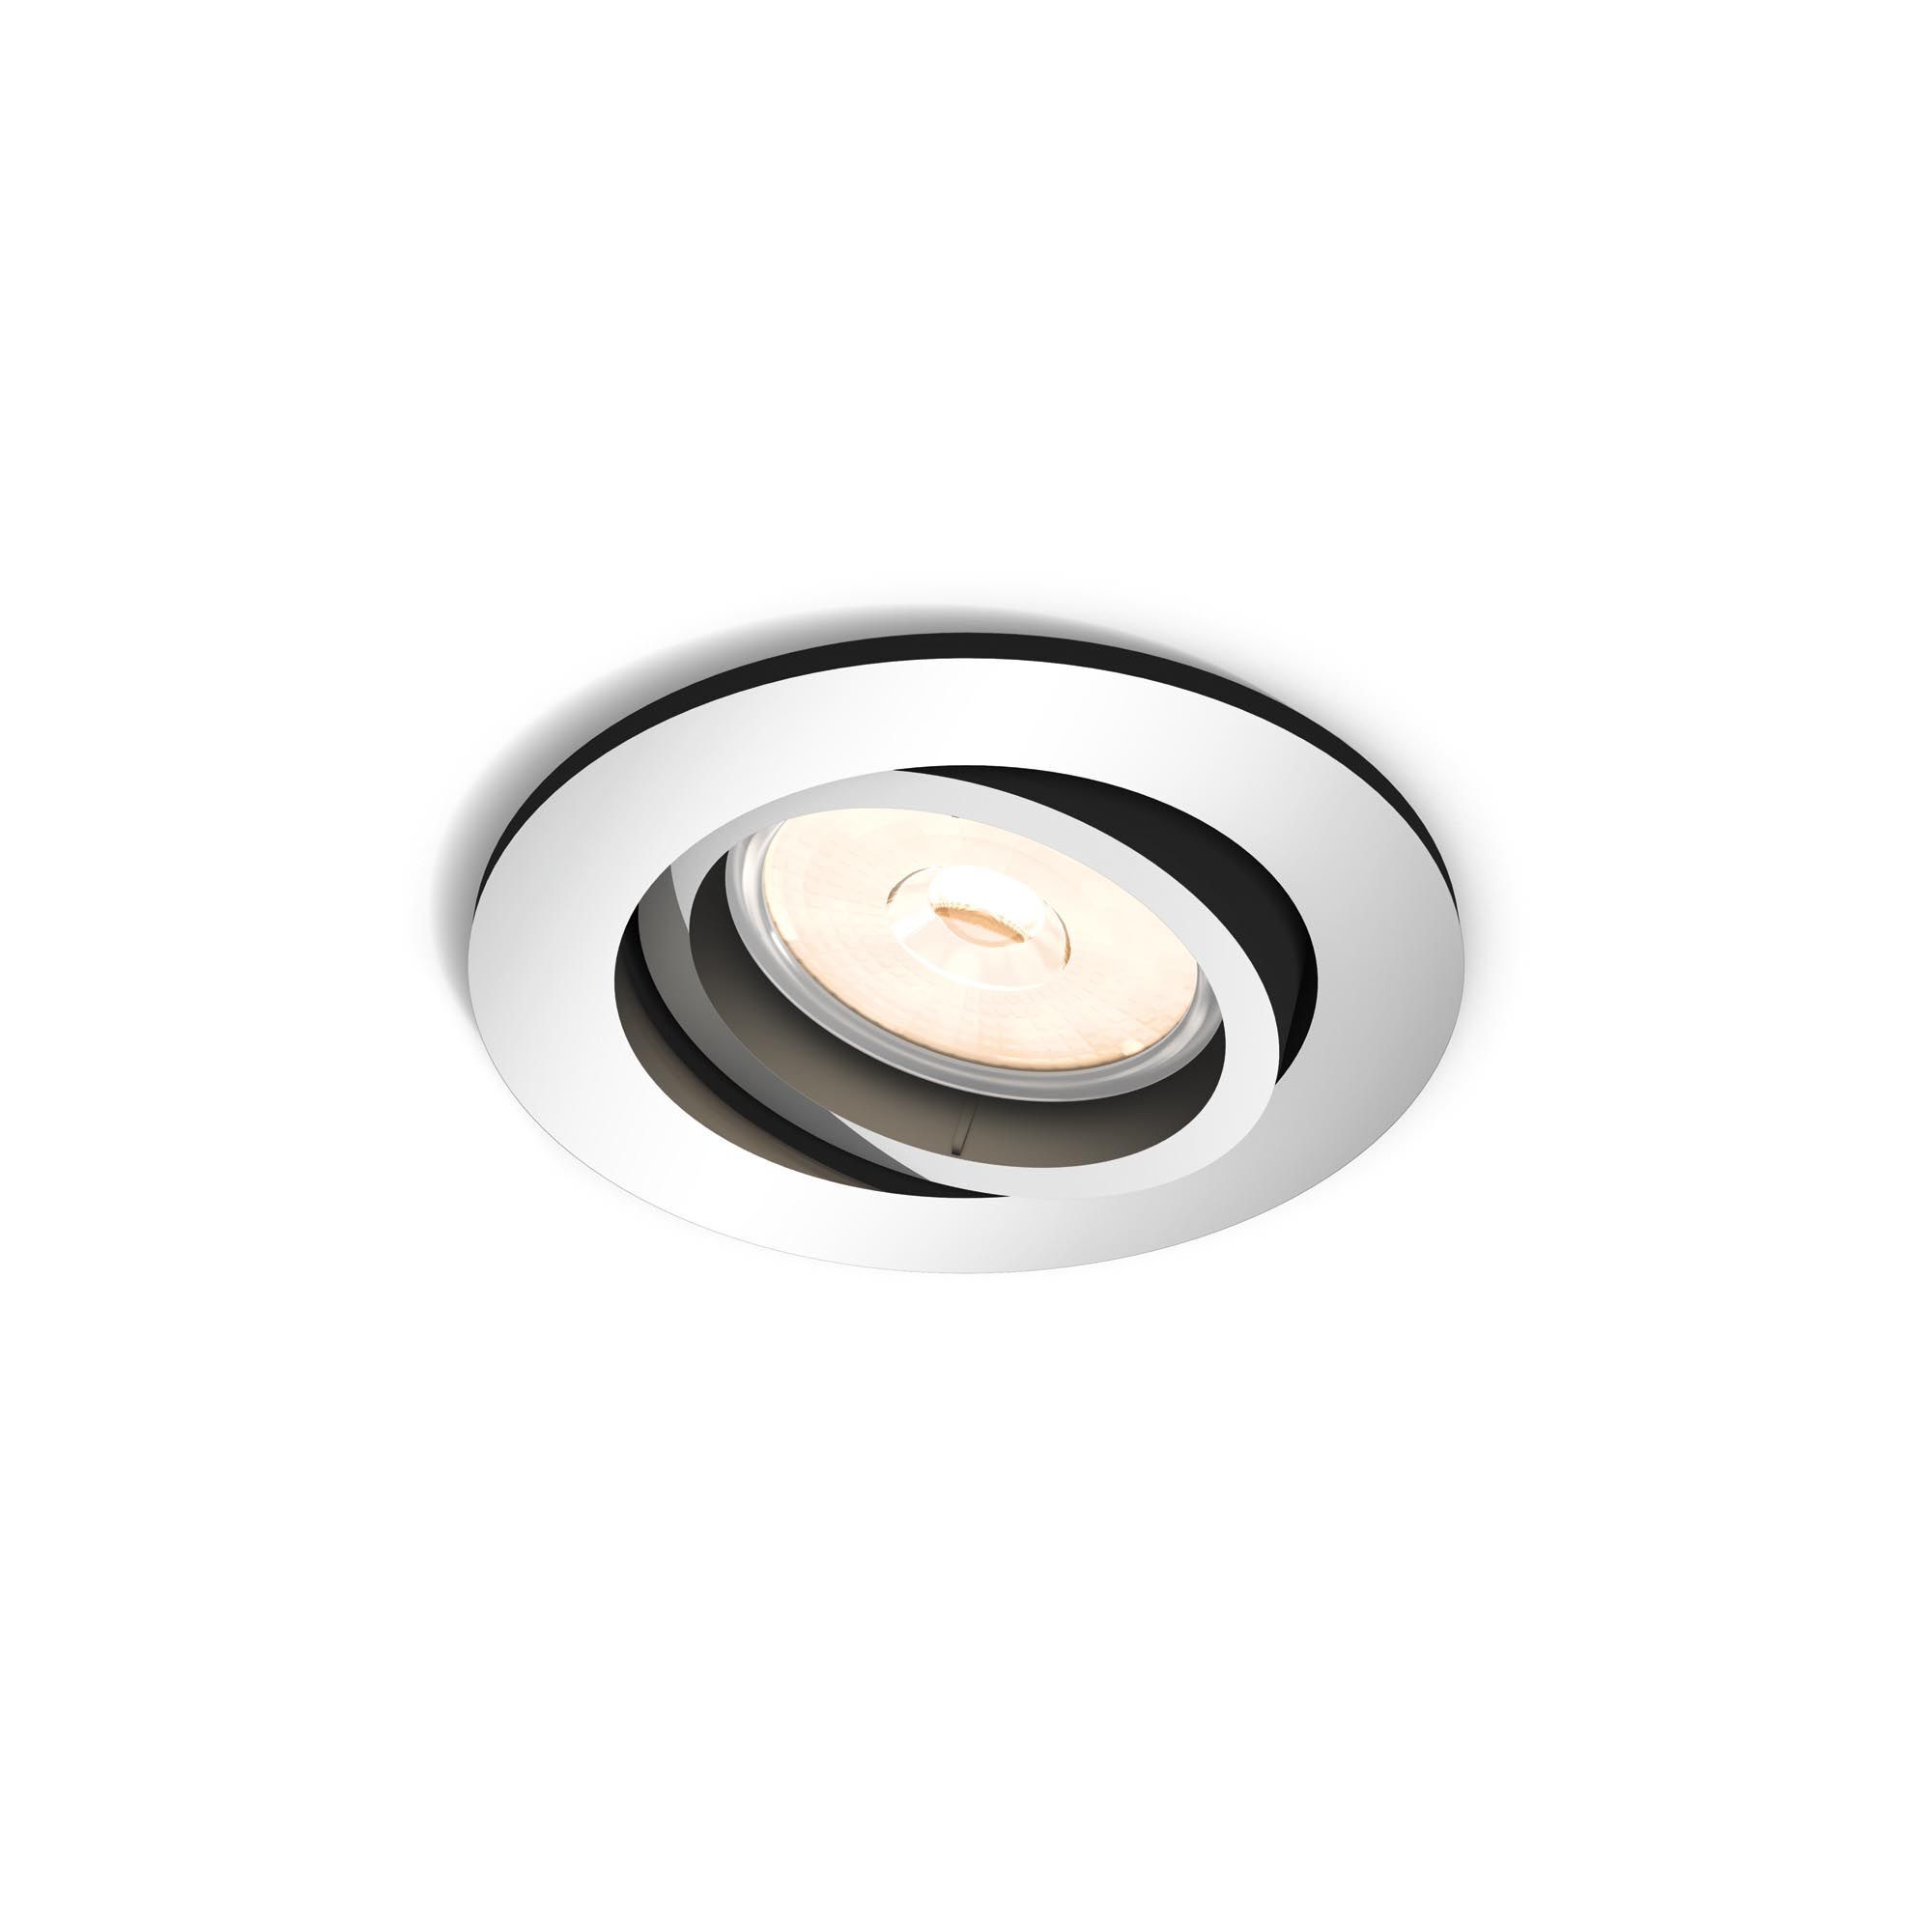 Philips myLiving DONEGAL chrome LED Recessed spot light